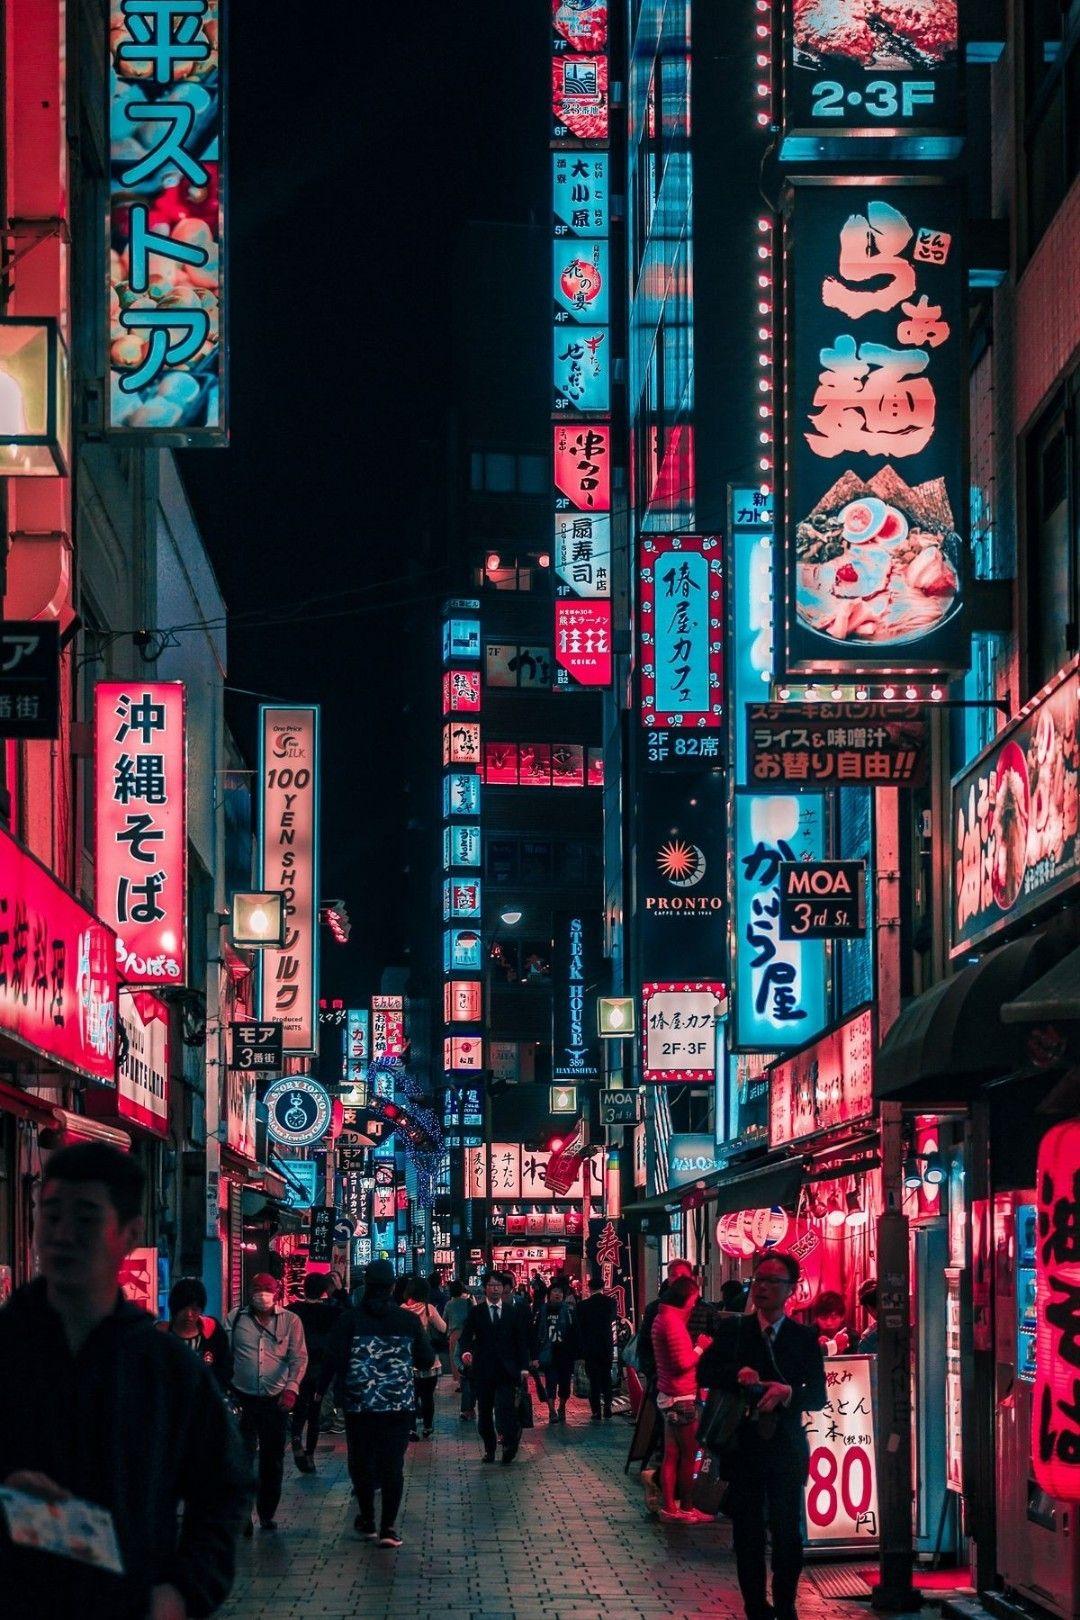 japanese aesthetic iphone wallpapers wallpaper cave japanese aesthetic iphone wallpapers